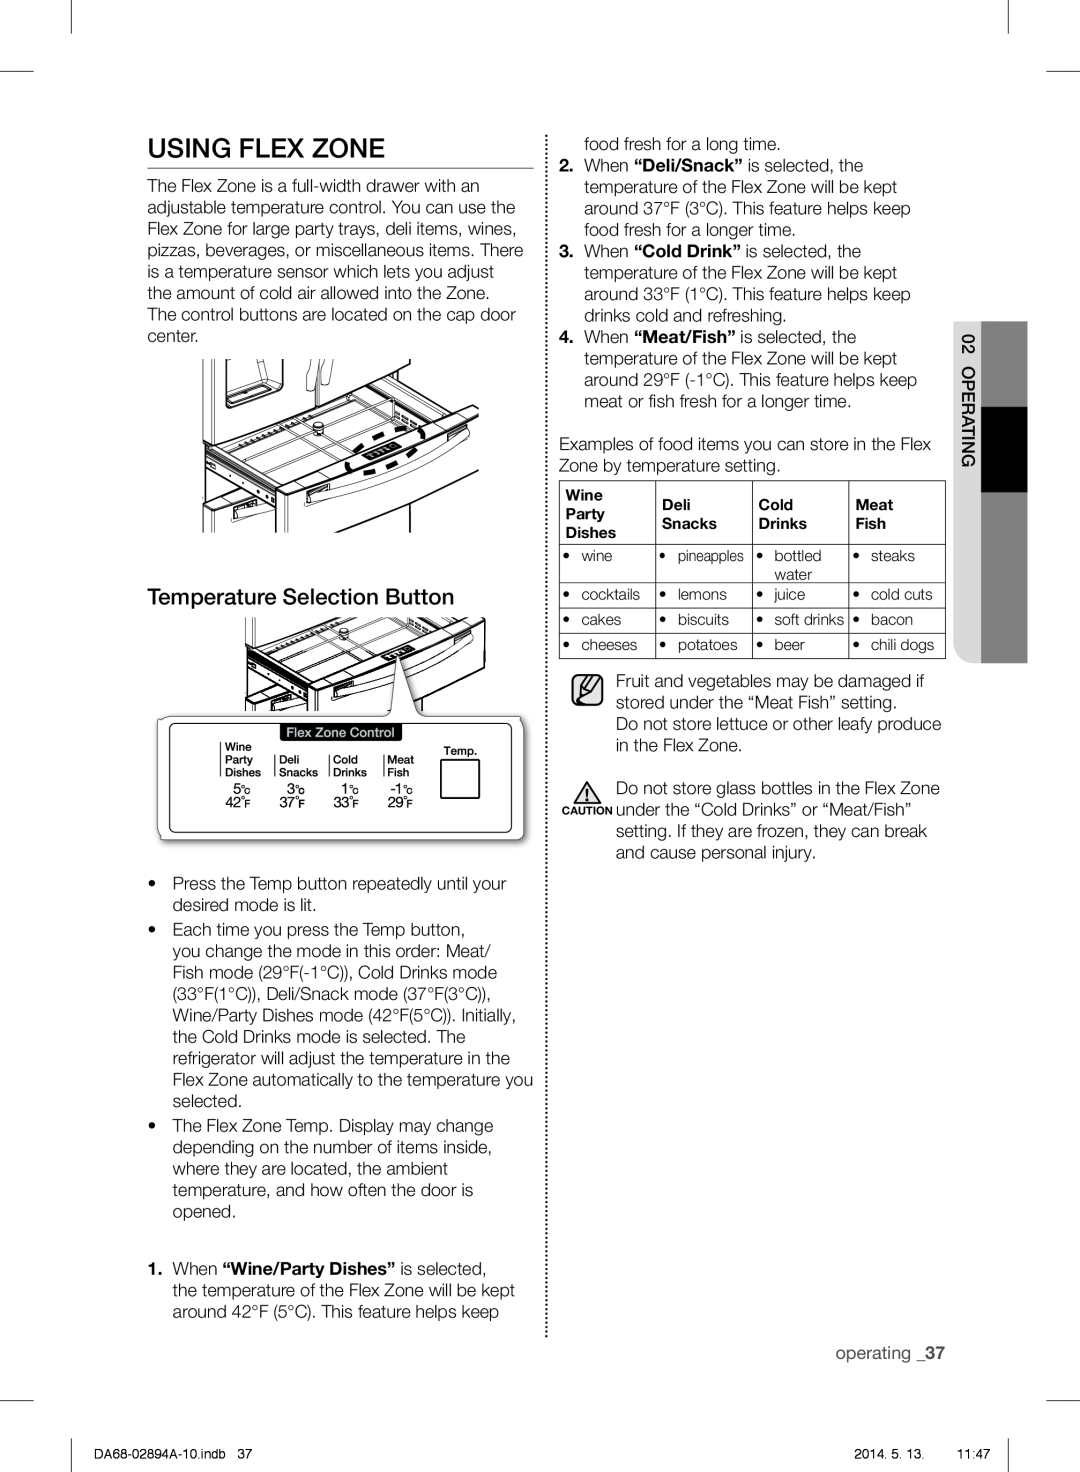 Samsung RF31FMESBSR user manual Using Flex Zone, Temperature Selection Button, operating _37 